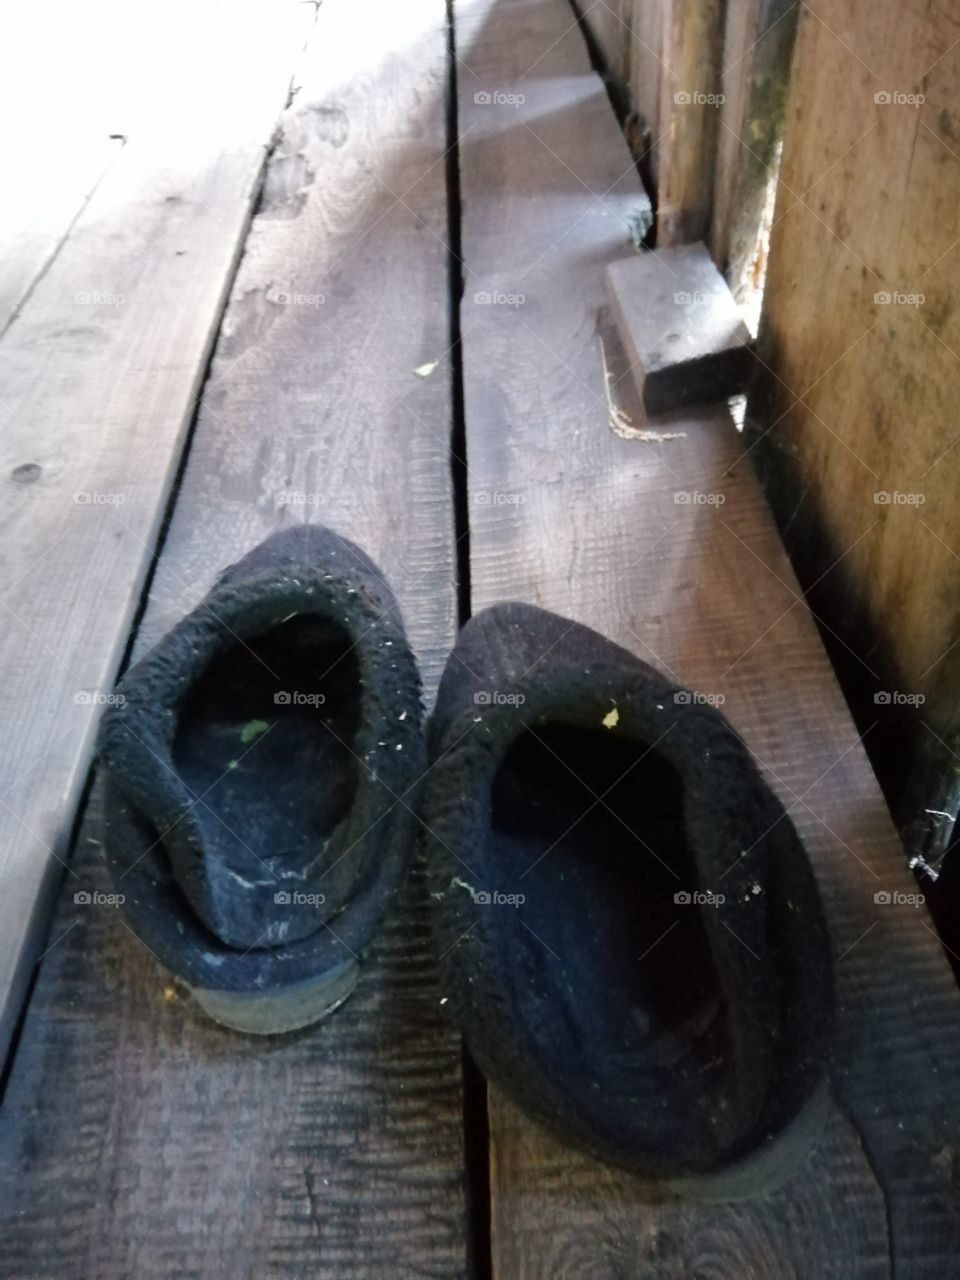 Old black uggs trampled on the floor of untreated boards